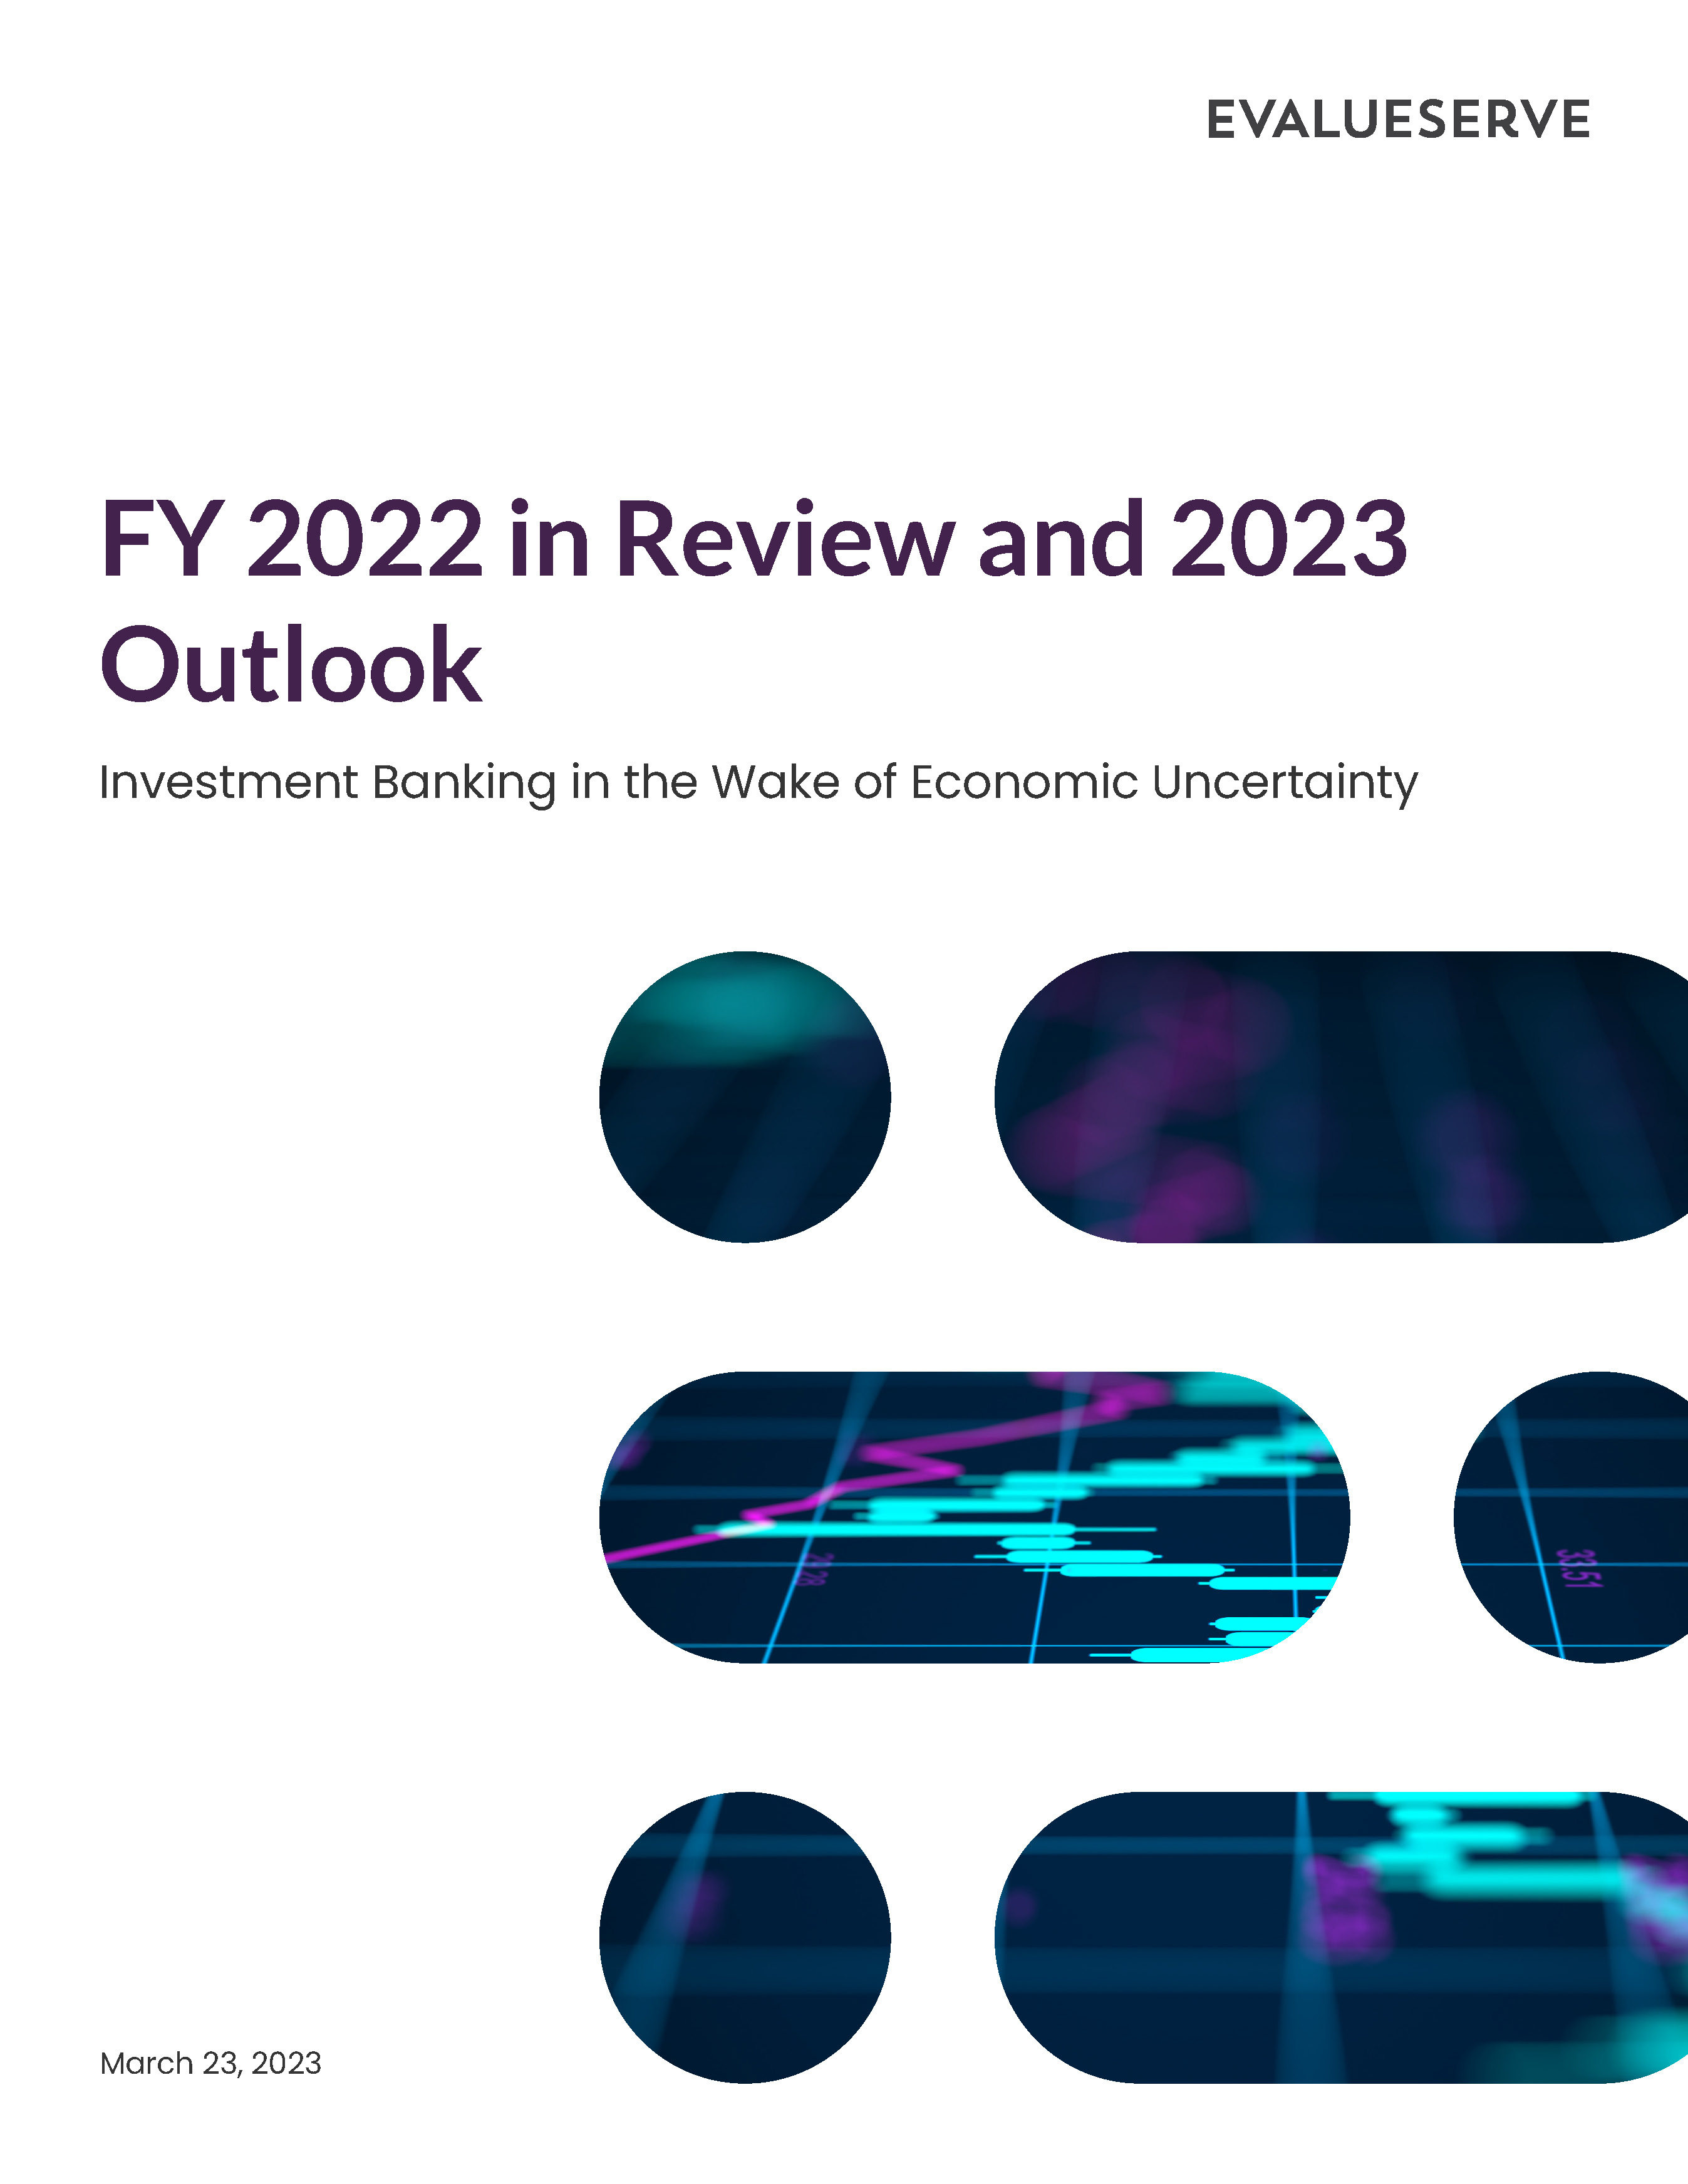 FY 2022 in Review and 2023 Outlook_Page_01